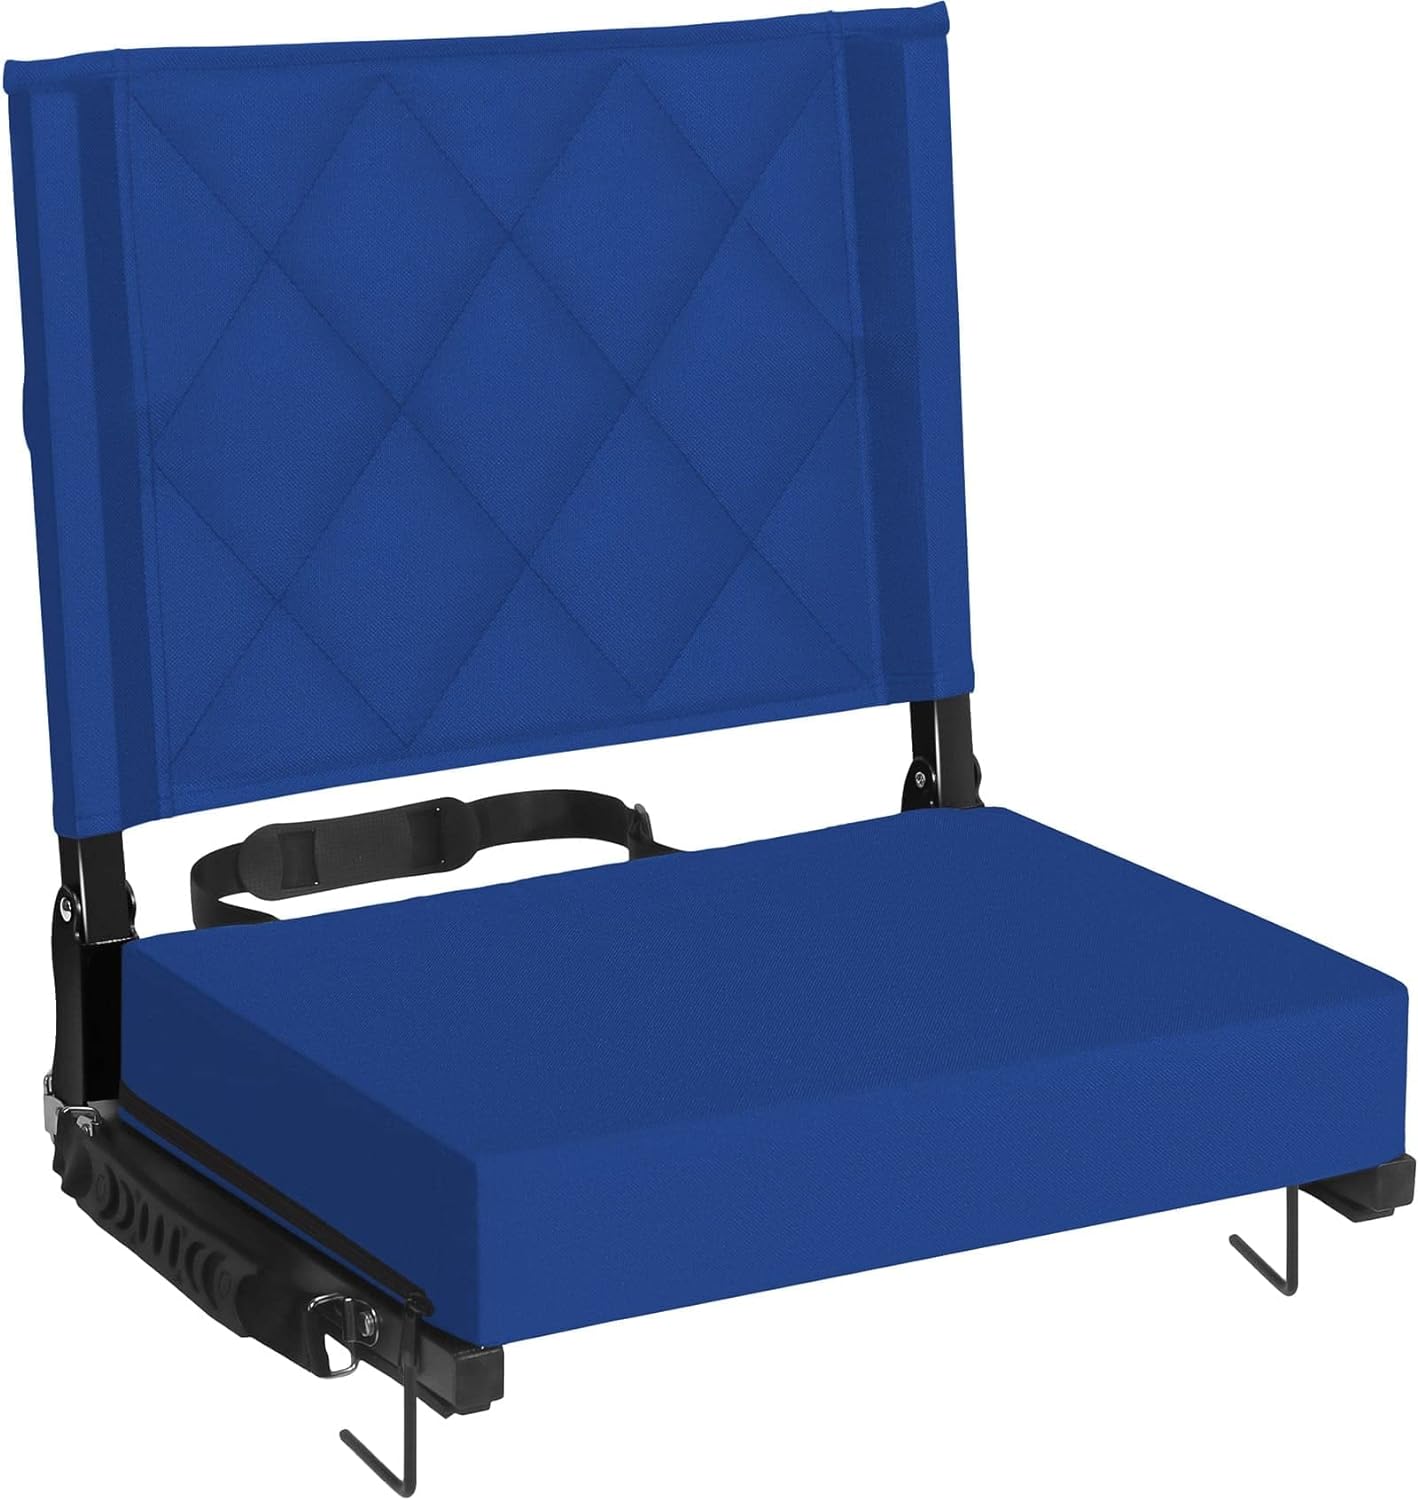 Stadium Seats for Bleachers with Back Support, Bleacher Seats with Backs and Cushion Wide Cykapu